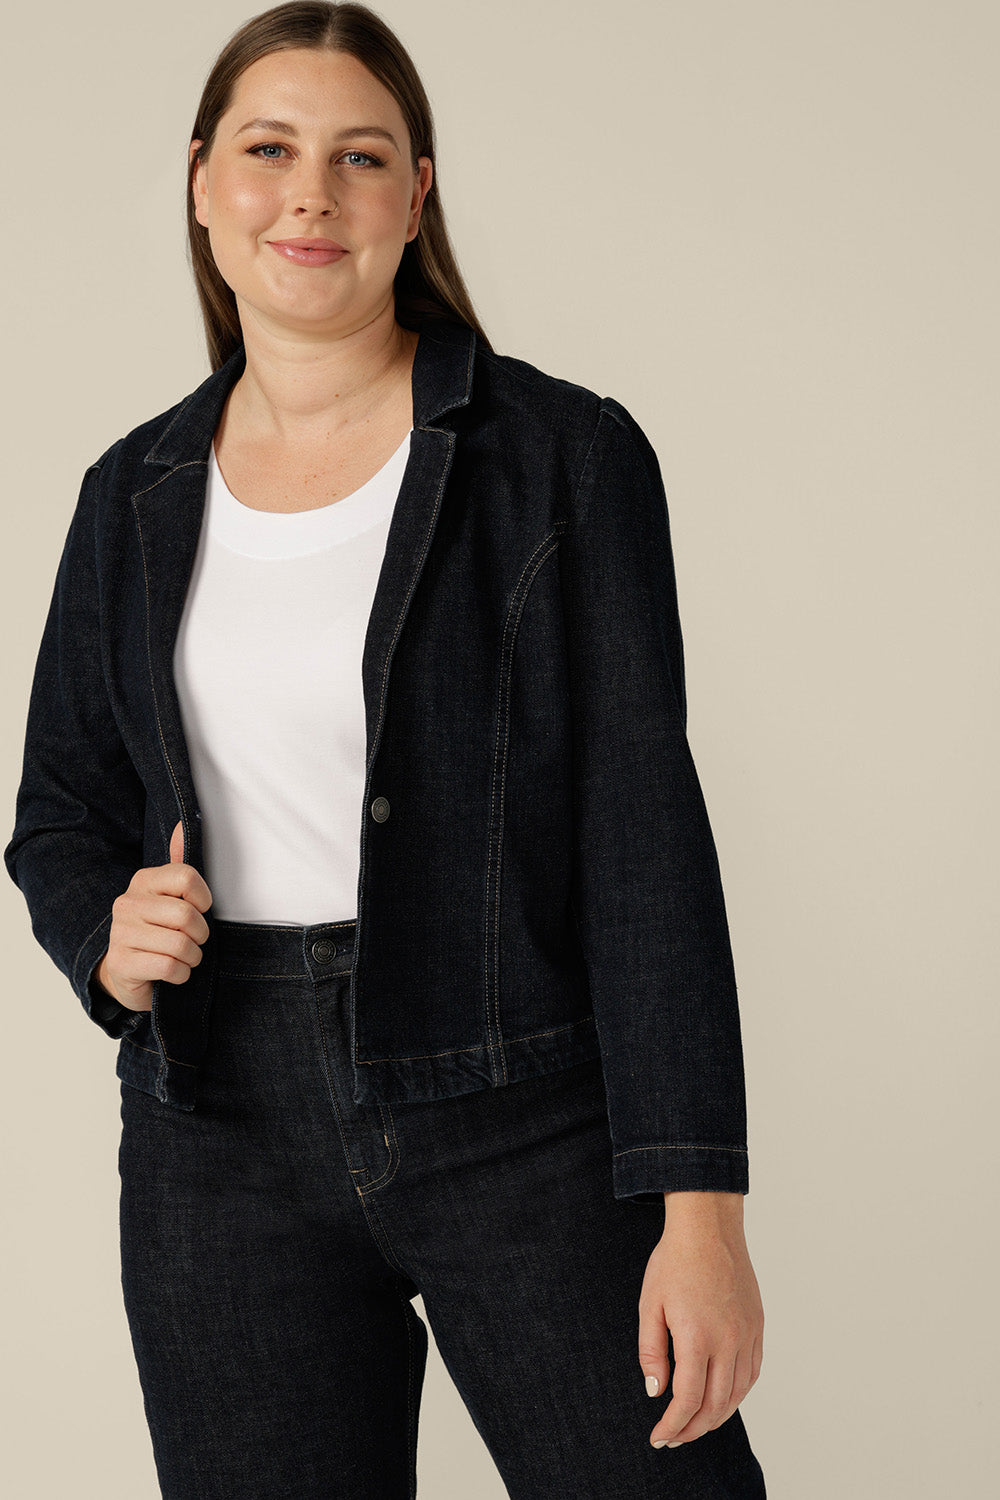 A size 12 woman wears a denim blazer-style jacket by Australian and New Zealand women's clothing label, L&F. Worn with high-waisted, flared cut jeans in comfort stretch, sustainable denim, this denim jacket is tailored to fit sizes 8 to 24.